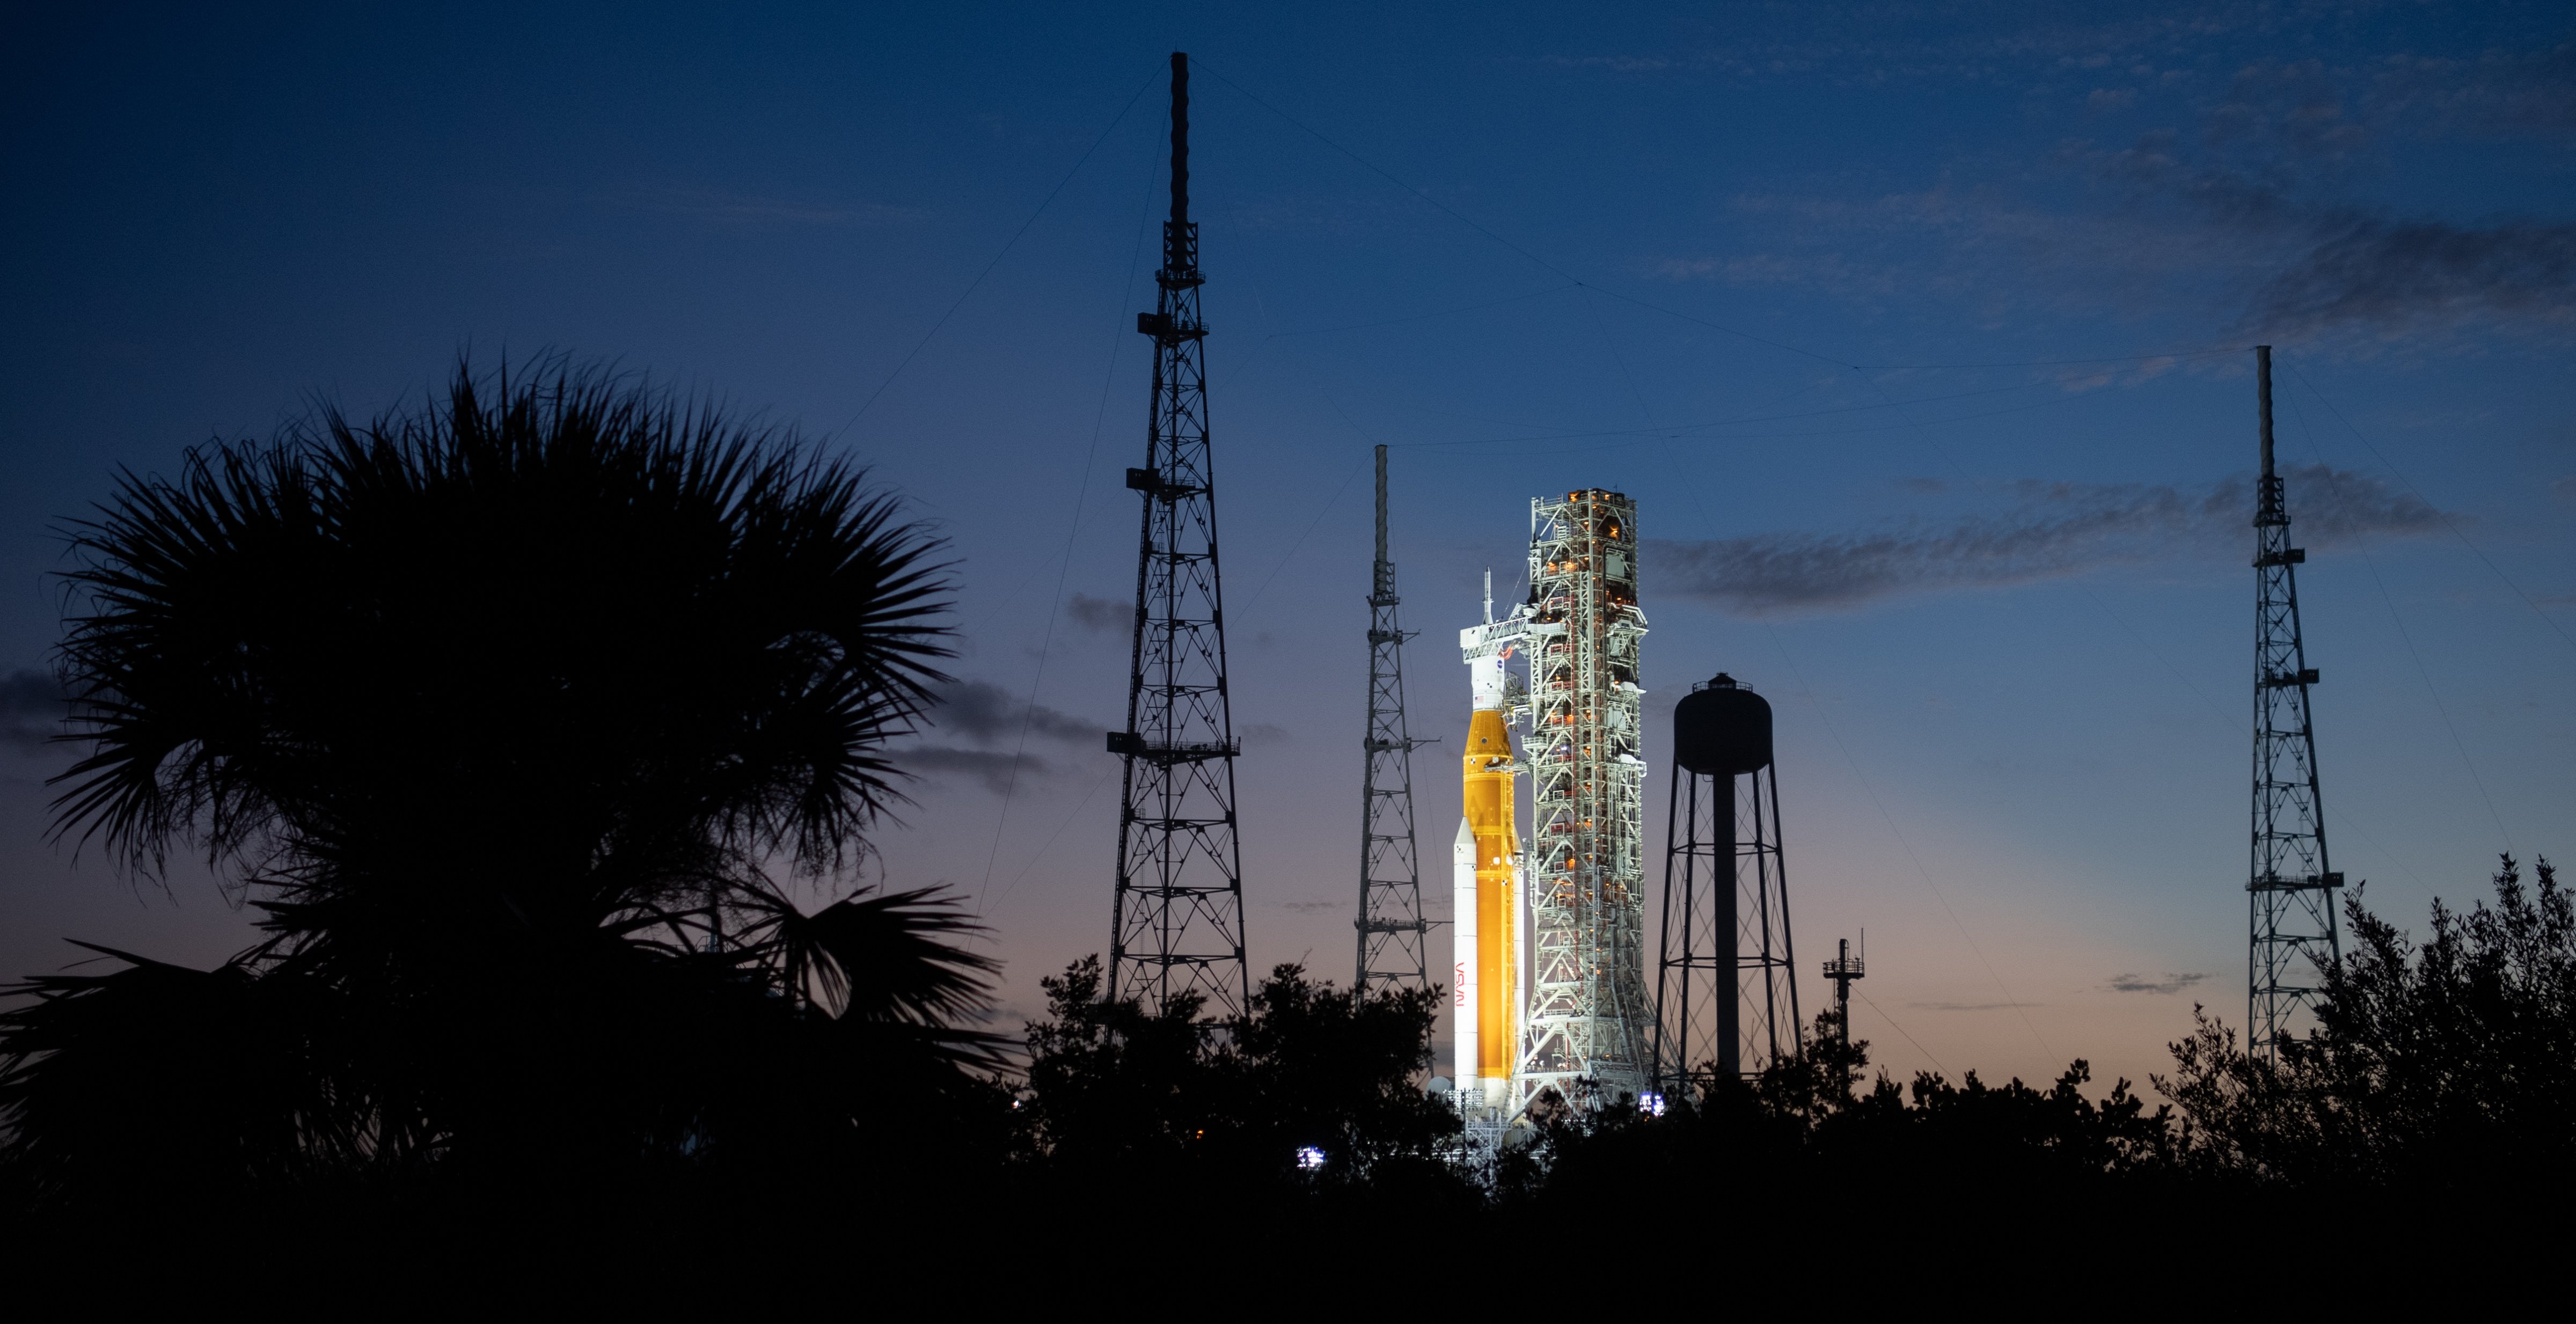 NASA’s Space Launch System (SLS) rocket with the Orion spacecraft aboard is seen illuminated by spotlights after sunset atop the mobile launcher at Launch Pad 39B as preparations for launch continue, Sunday, Nov. 6, 2022, at NASA’s Kennedy Space Center in Florida. (NASA/Joel Kowsky)